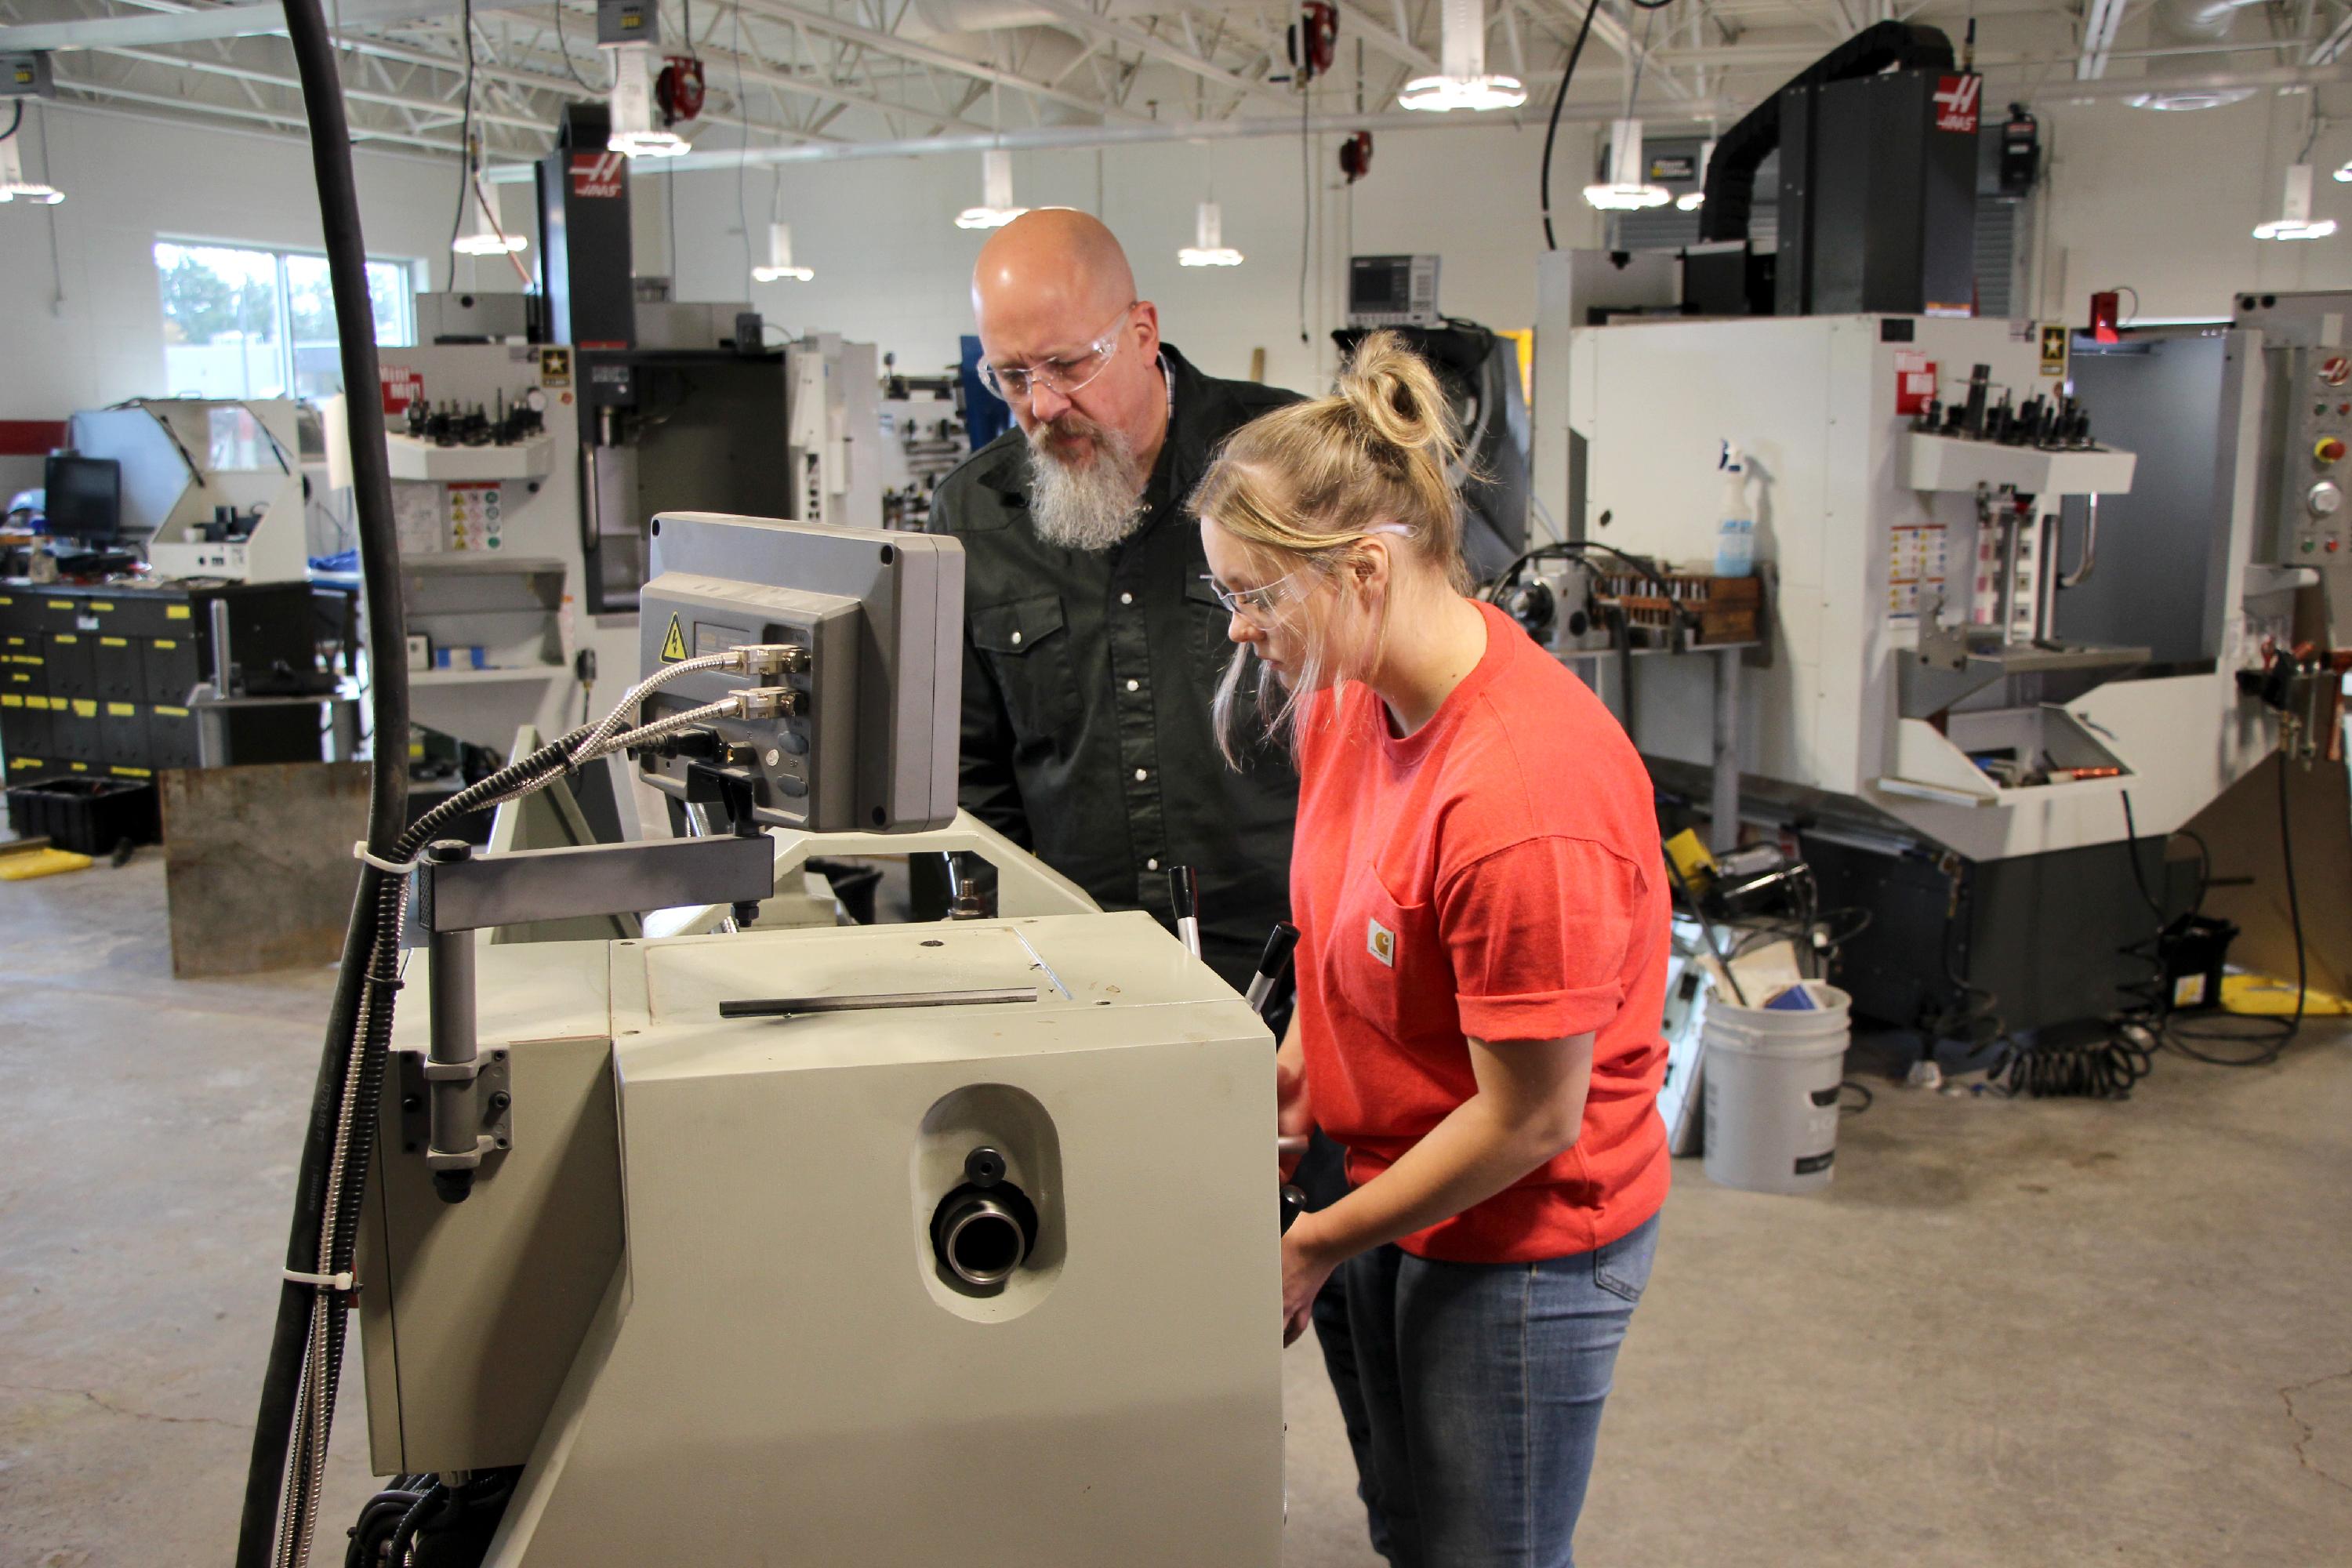 A student works on a machine while the instructor watches and offers help